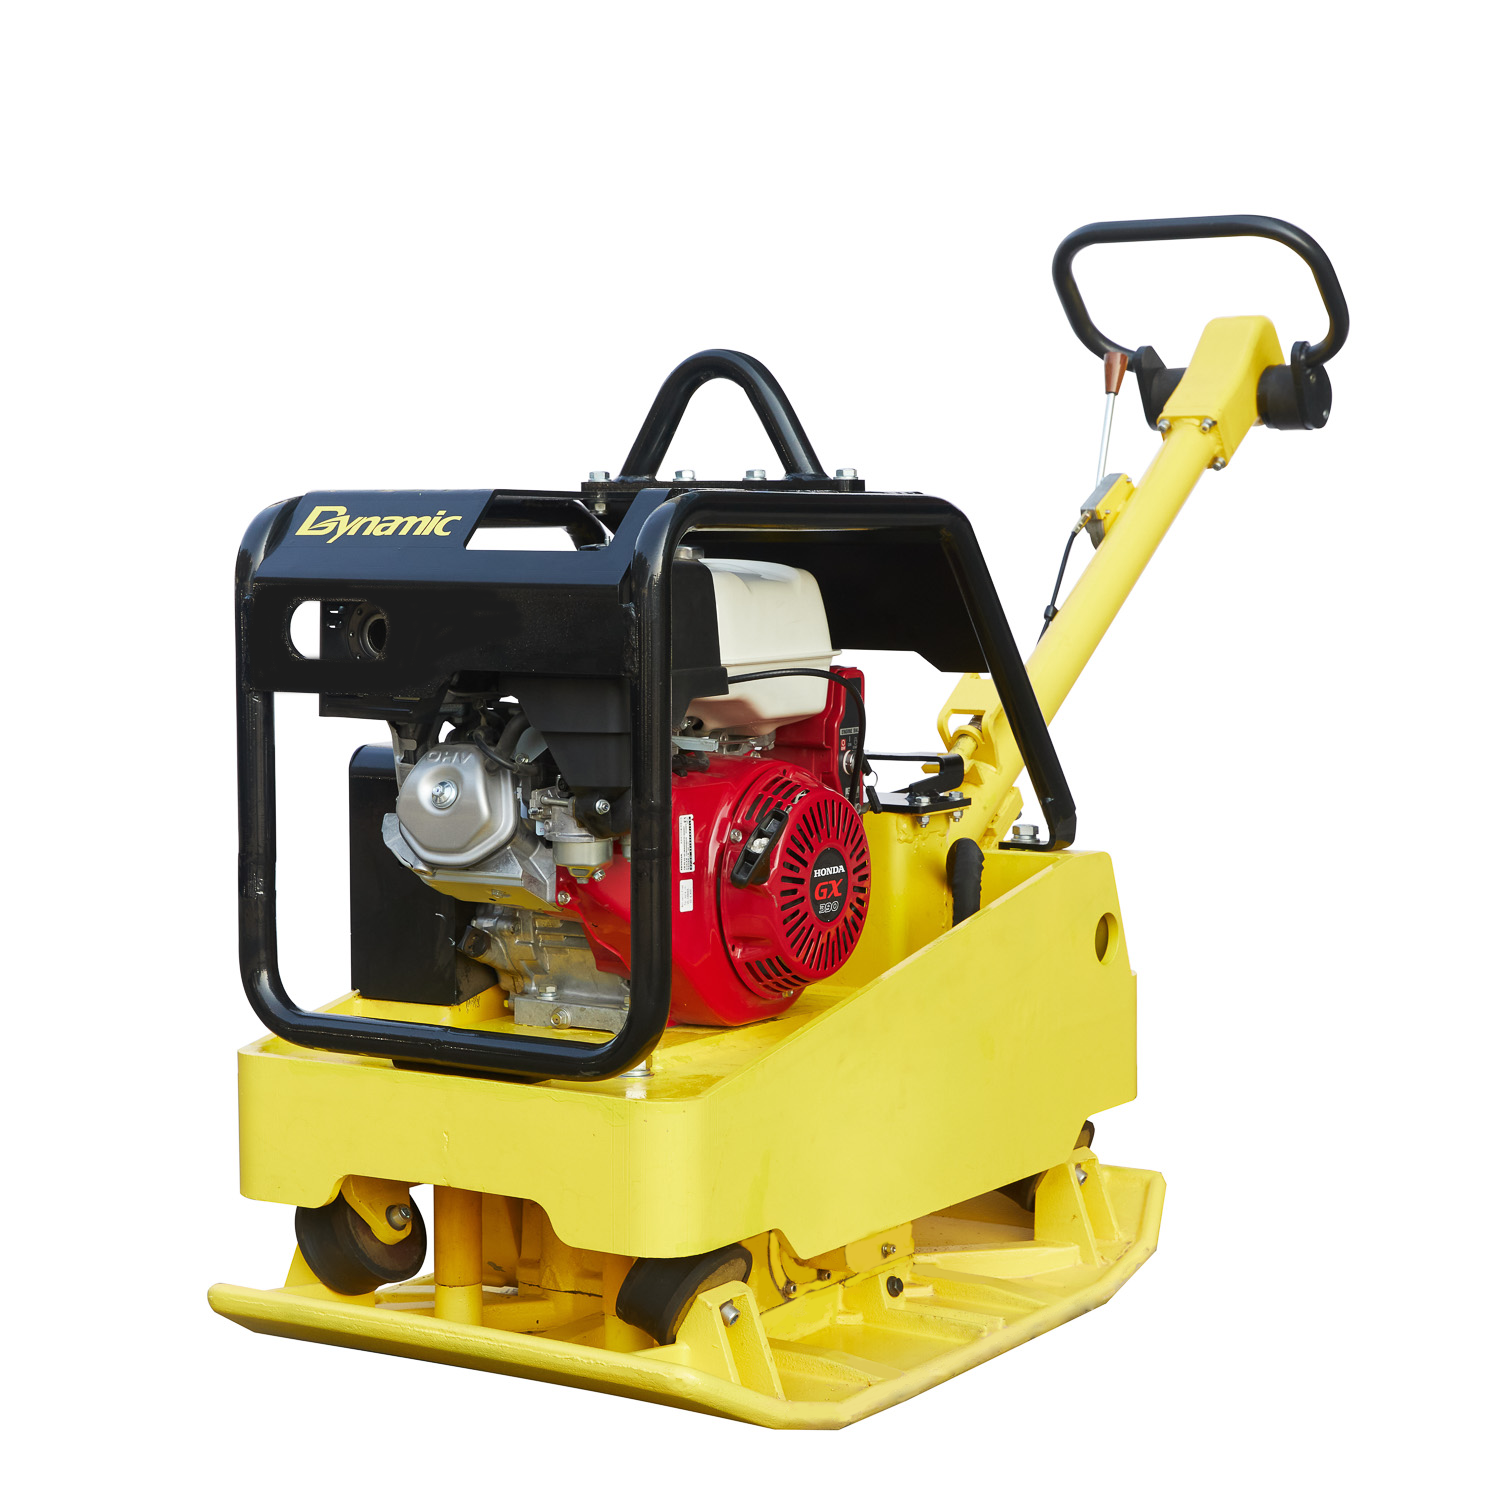 DUR-600 Two eccentric blocks 60kN pressure strength Large tonnage vibrating plate compactor